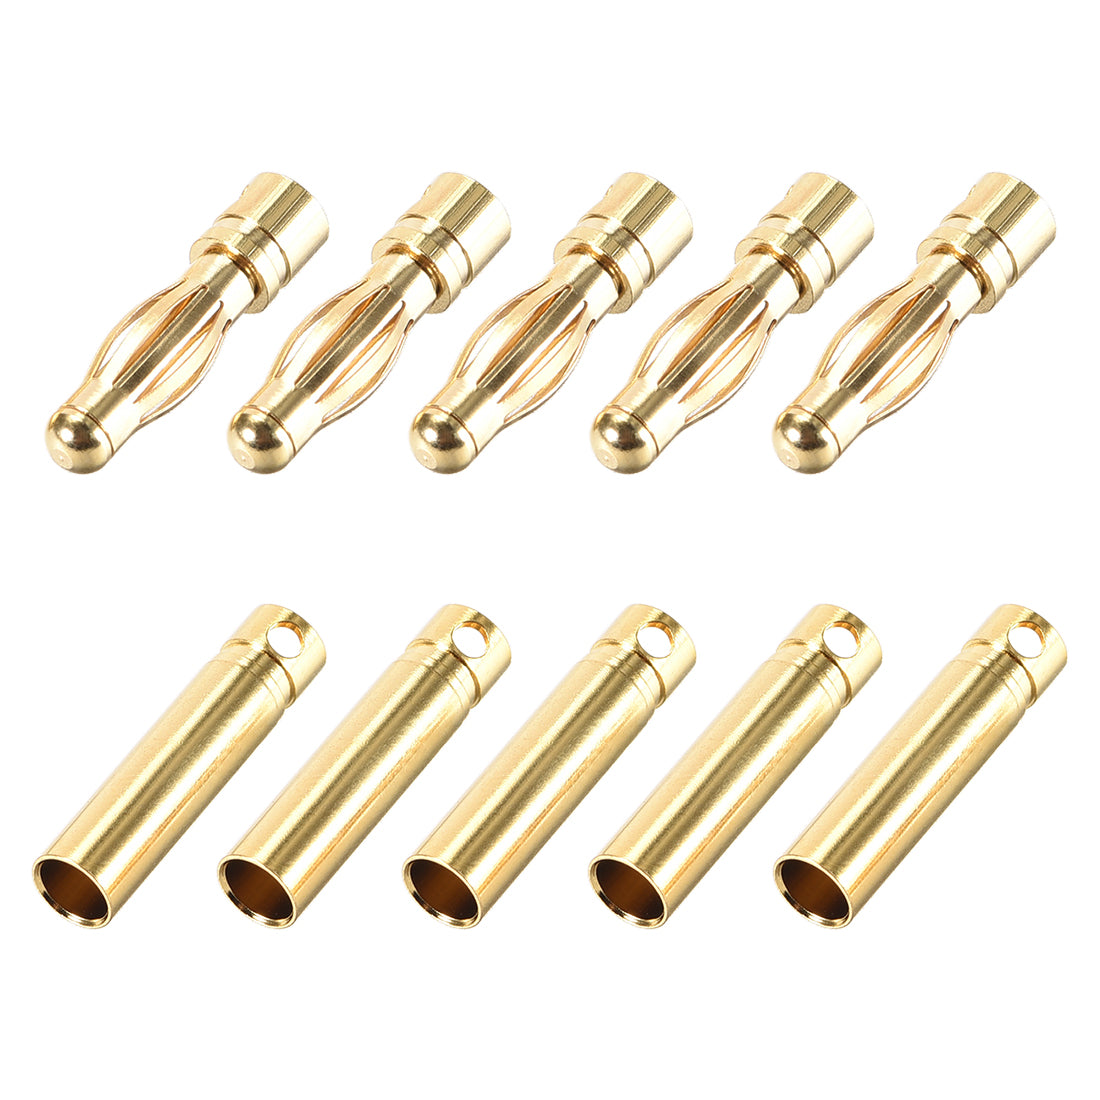 uxcell Uxcell 4mm Male and Female Banana Speaker Plug Cable Connectors Gold Tone Jack Connector 5 Pairs